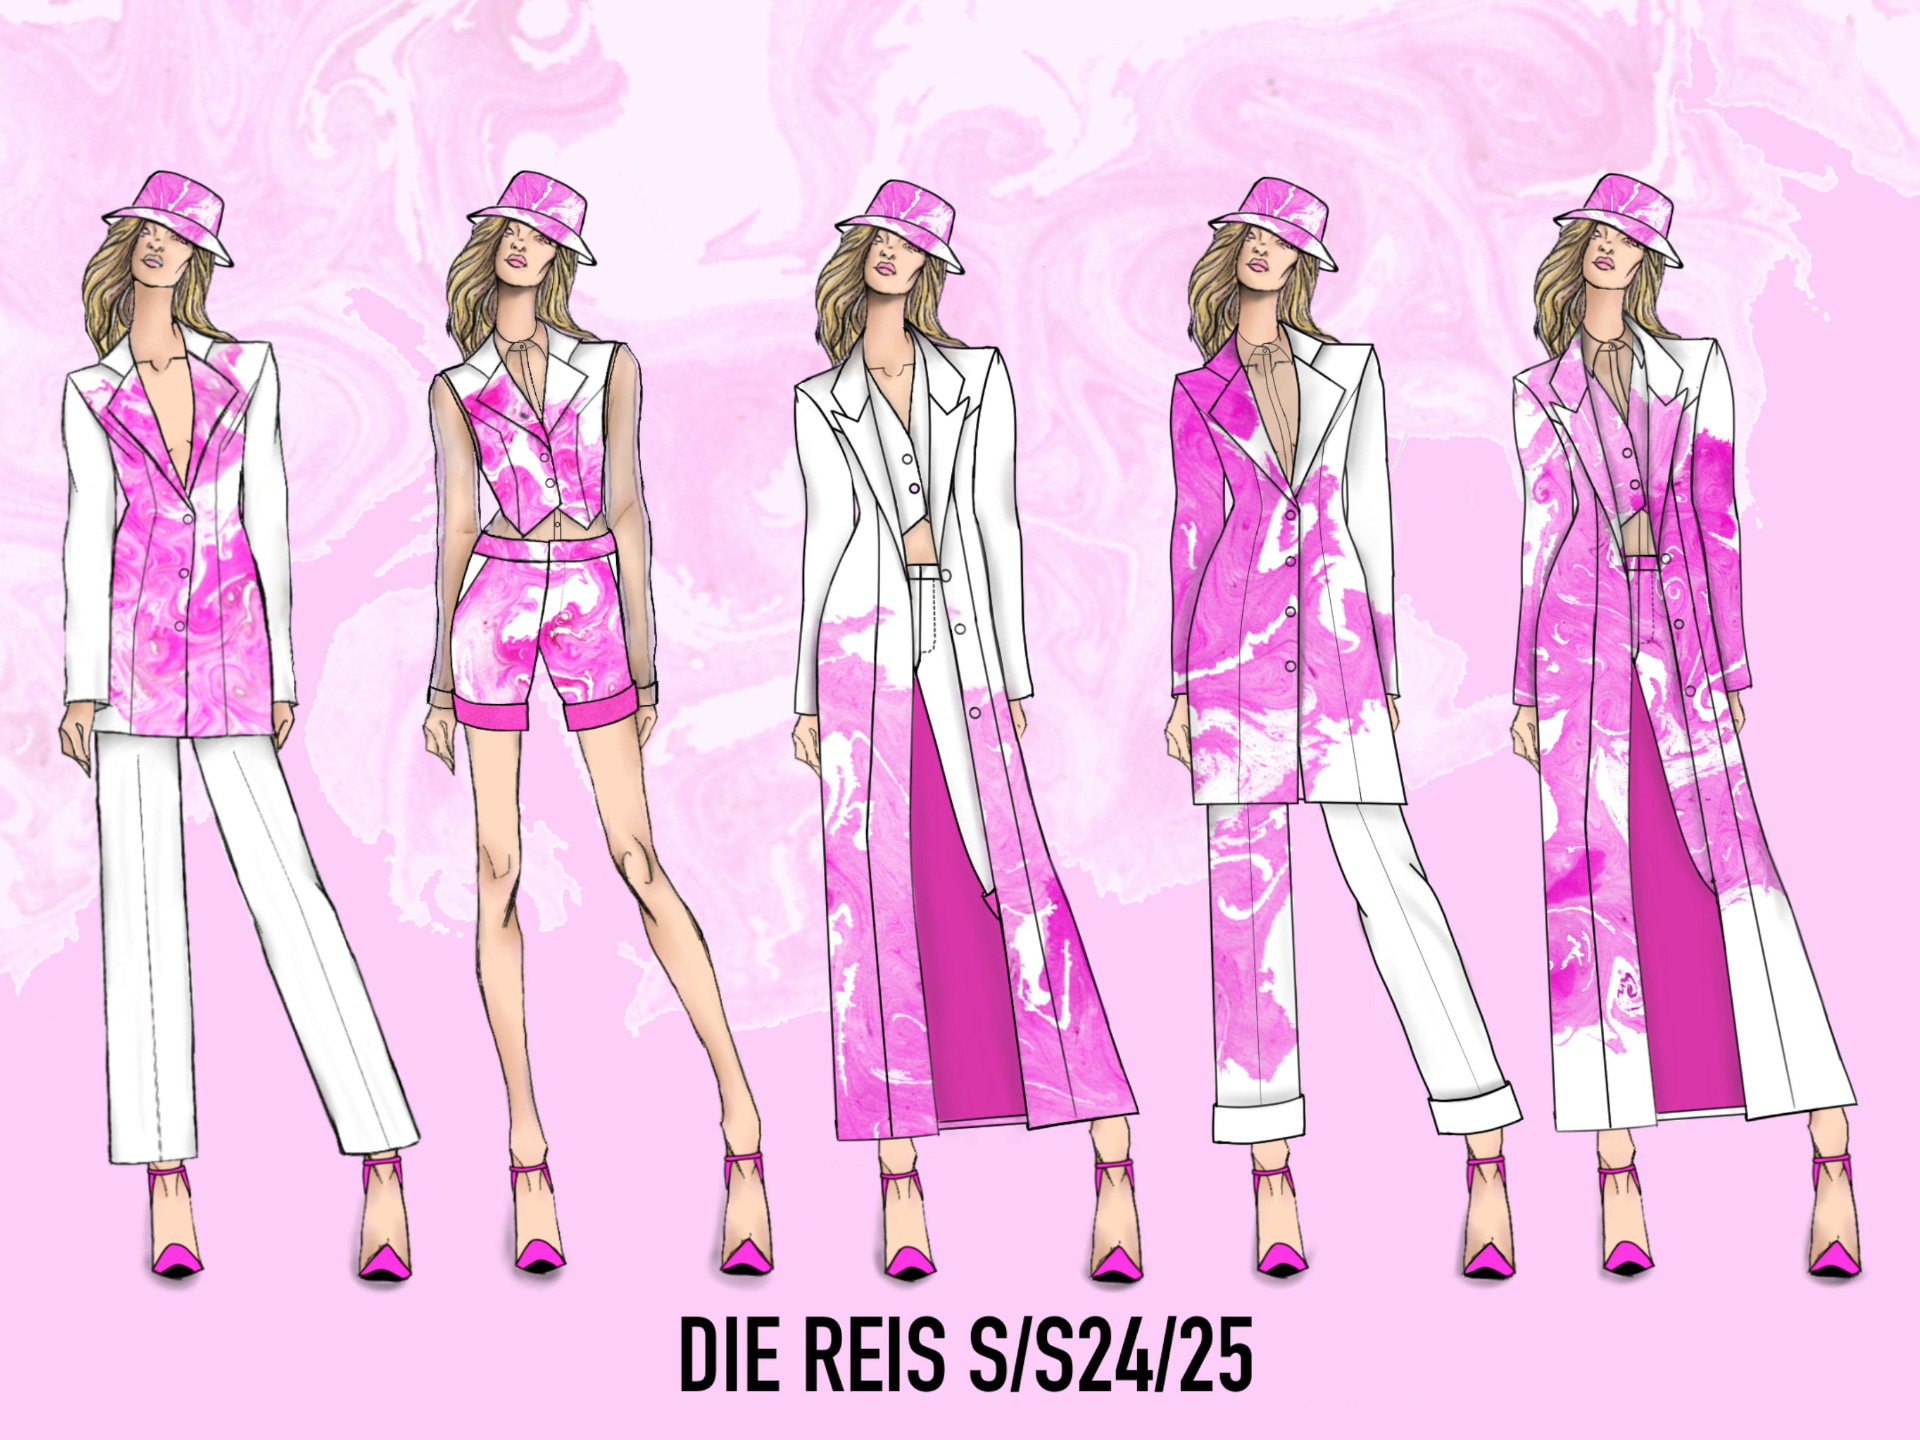 Five illustrations of pink and white outfits